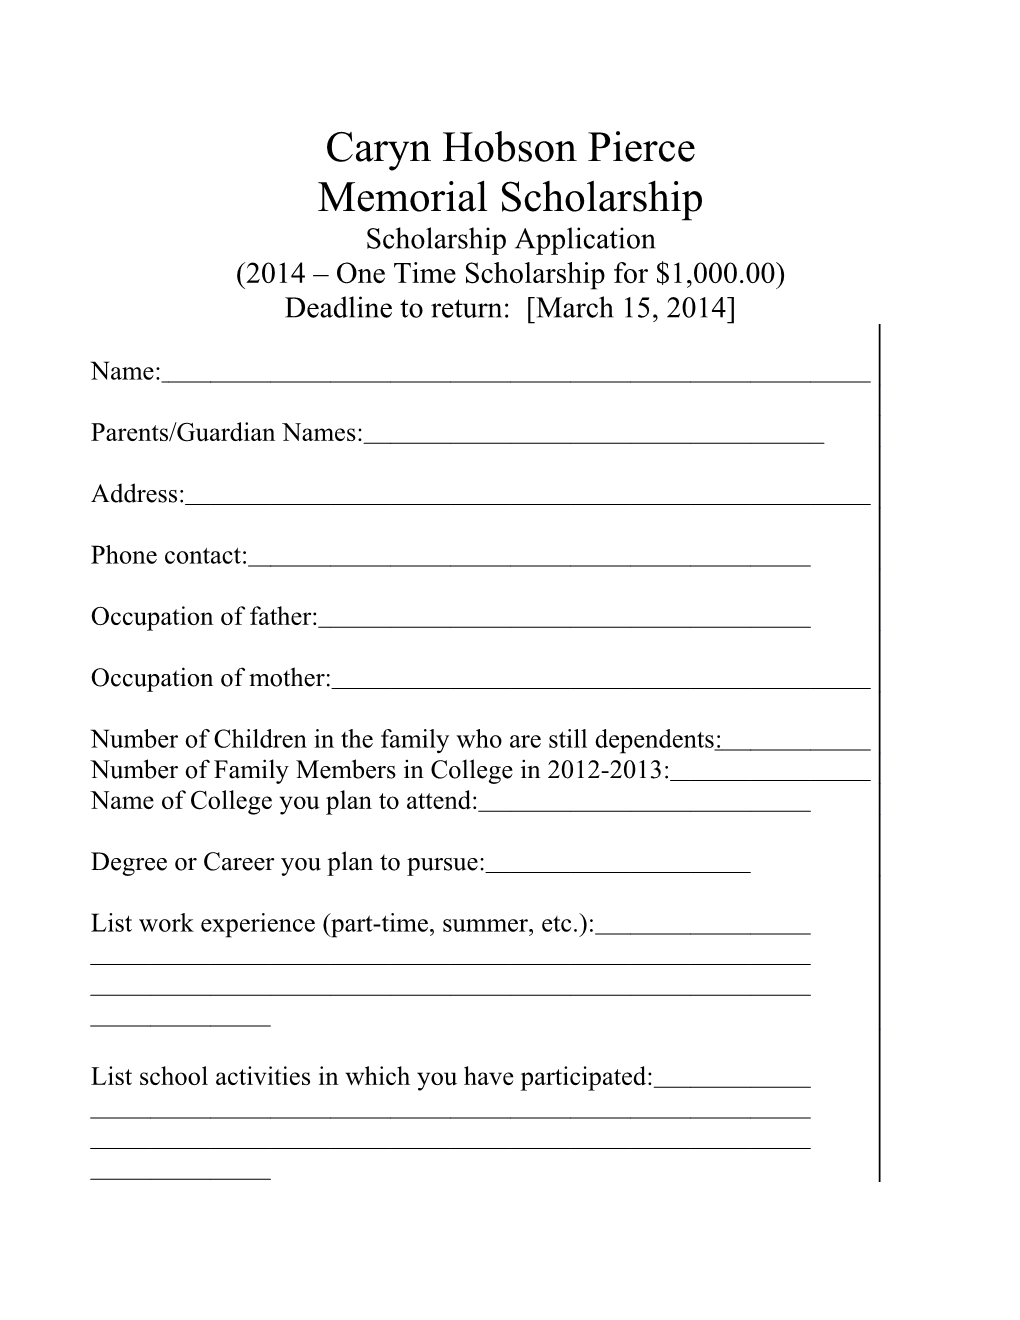 2014 One Time Scholarship for $1,000.00